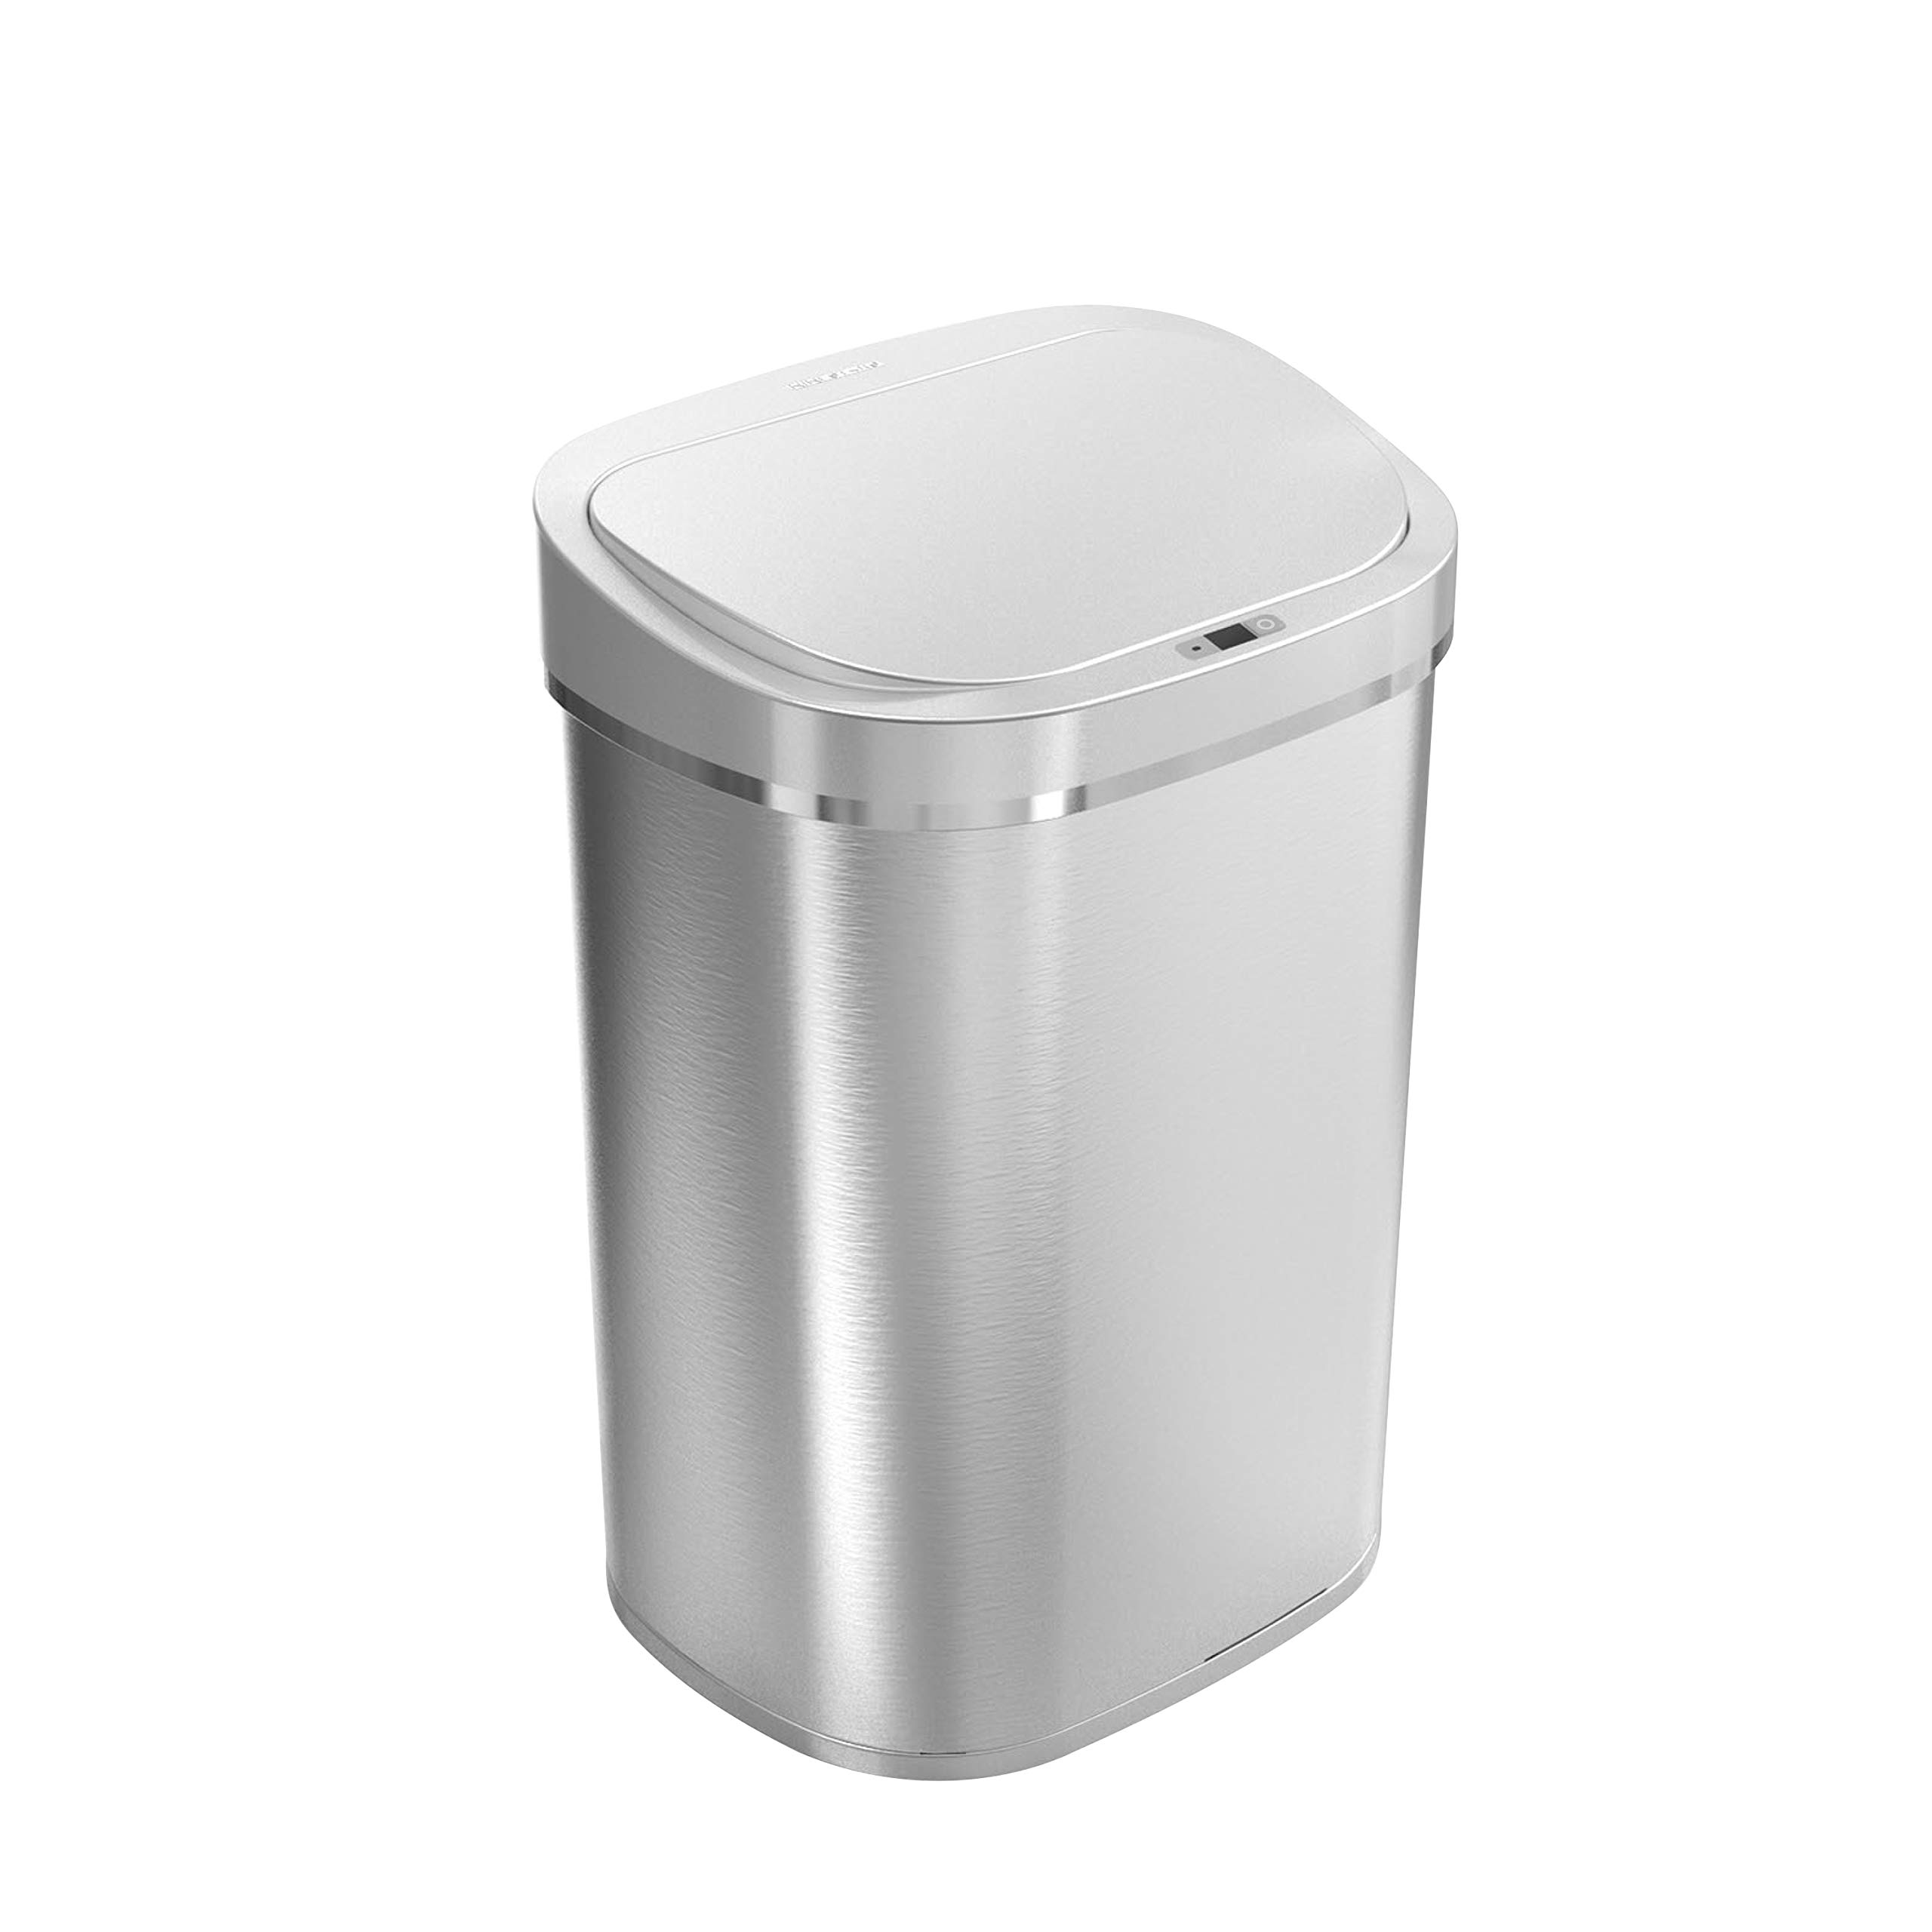 Ninestars Automatic Touchless Infrared Motion Sensor Trash Can